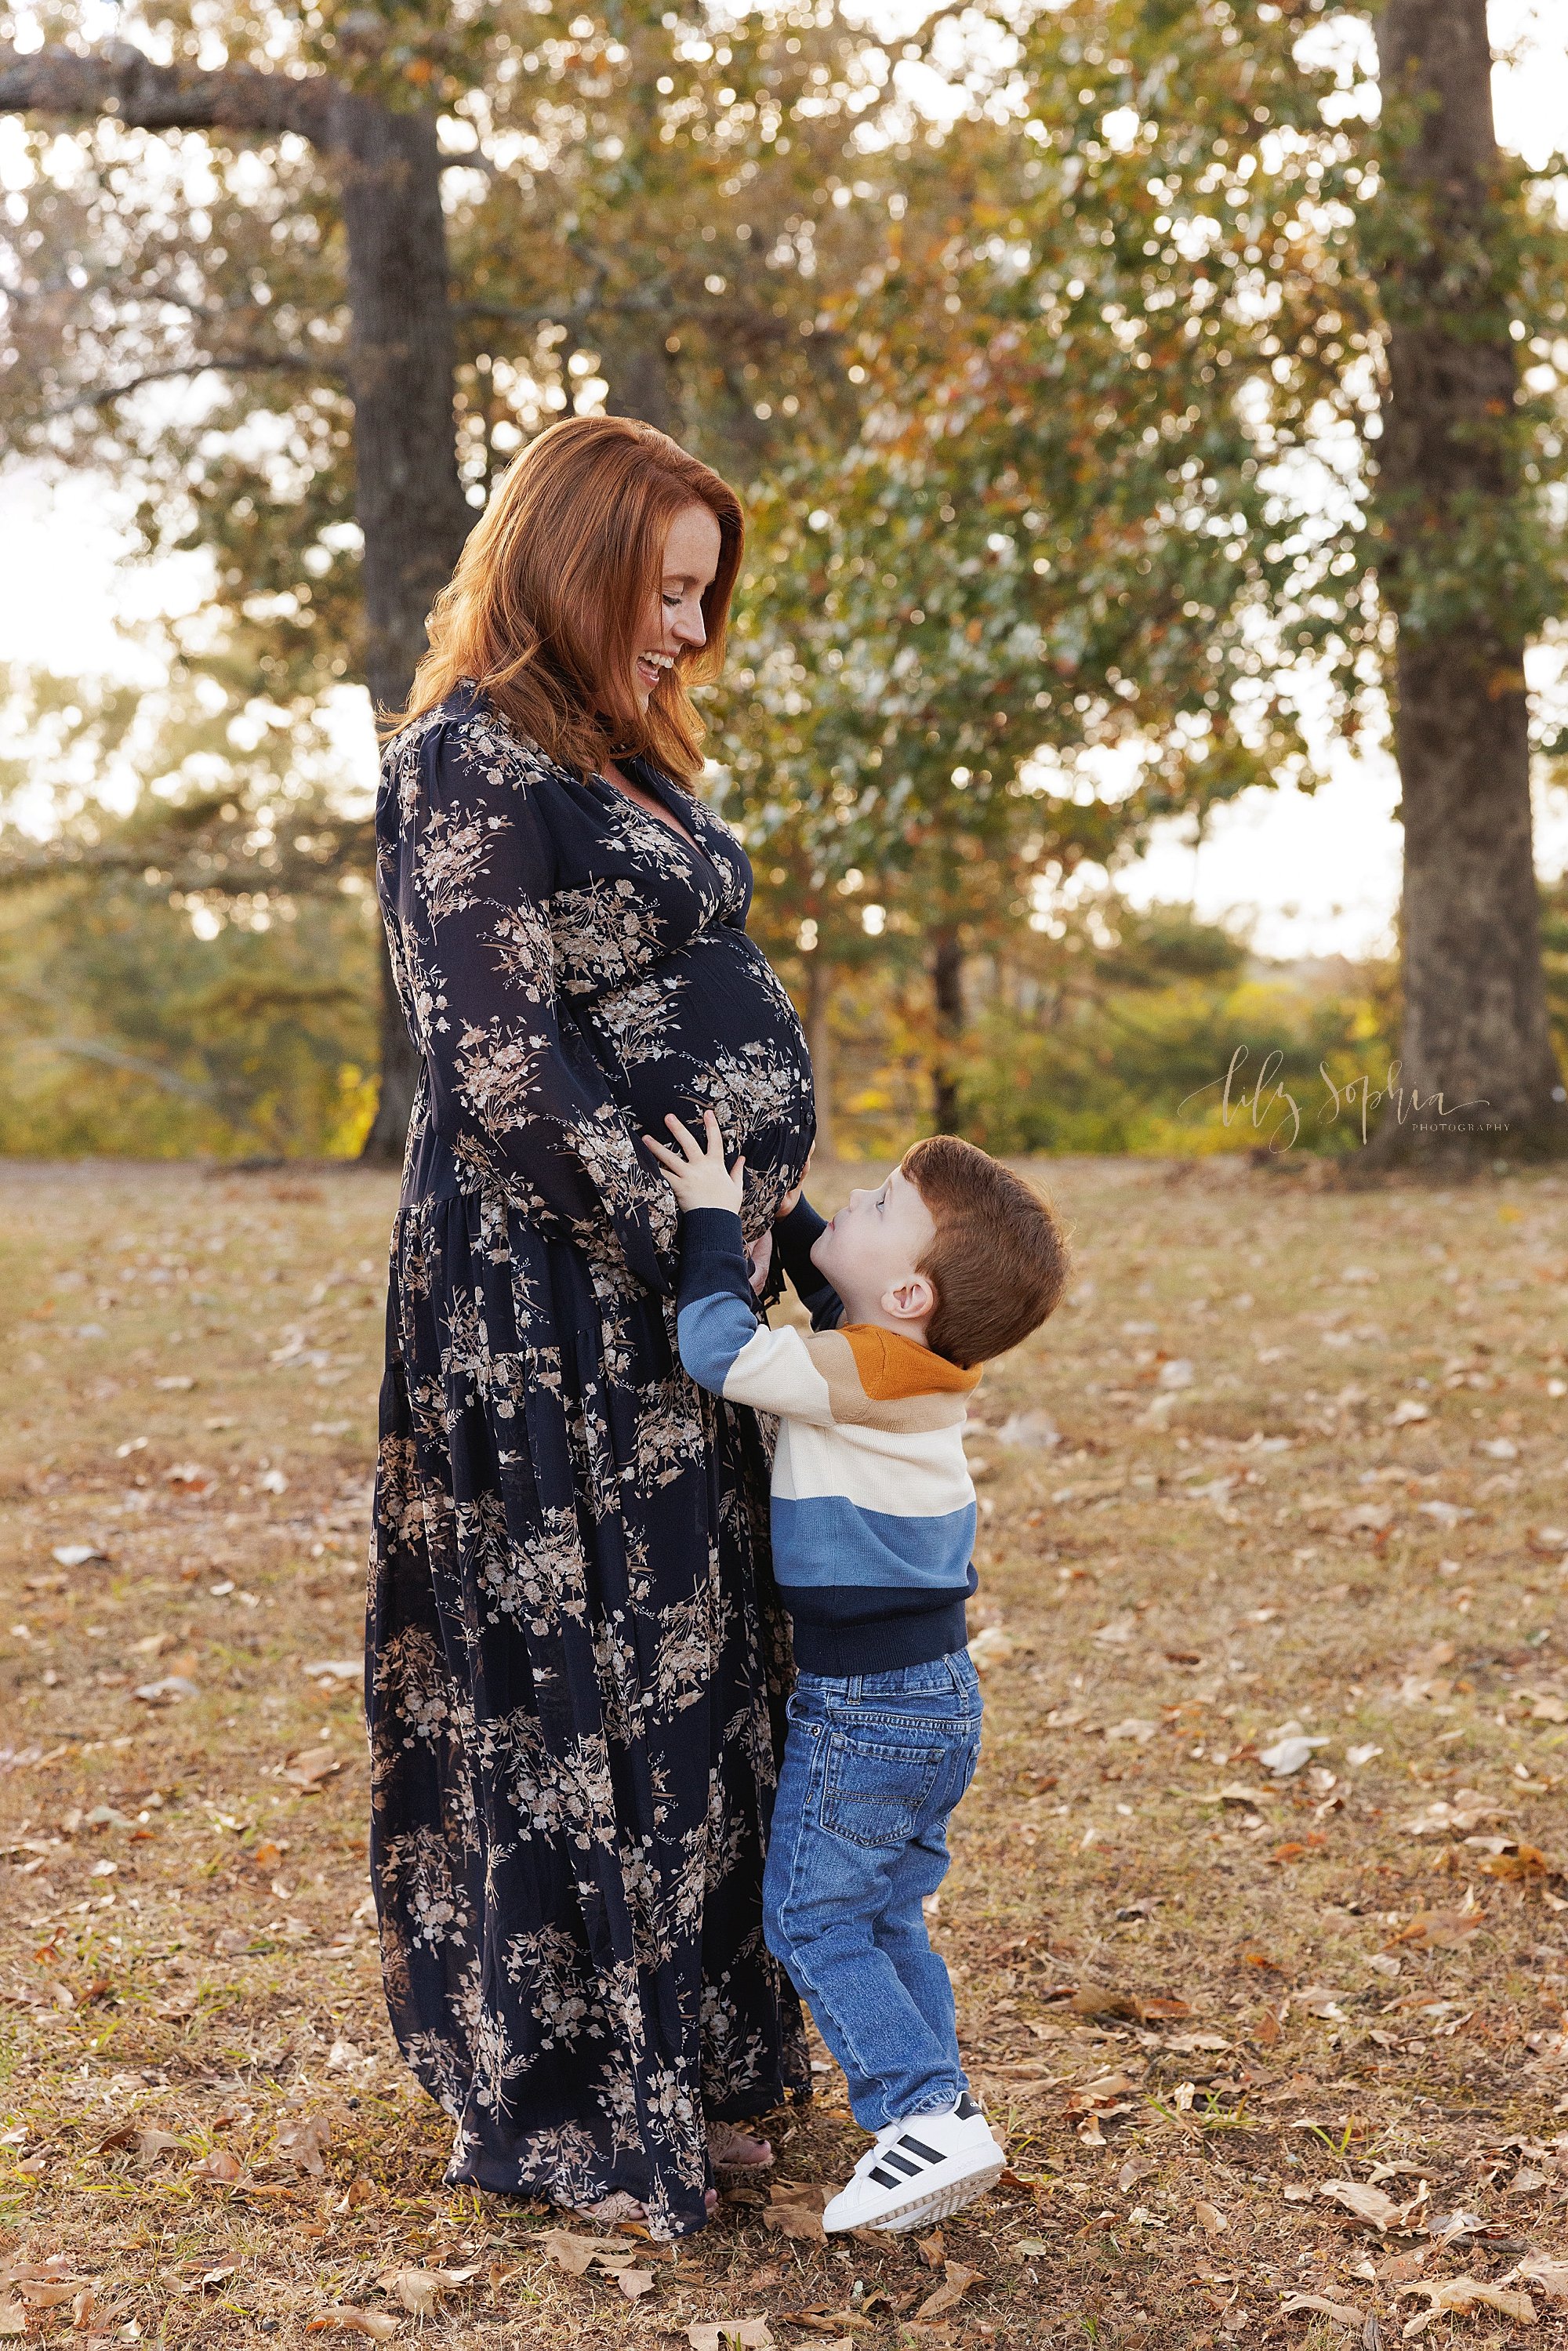 intown-atlanta-decatur-brookhaven-buckhead-outdoor-fall-pictures-family-maternity-photoshoot_5562.jpg